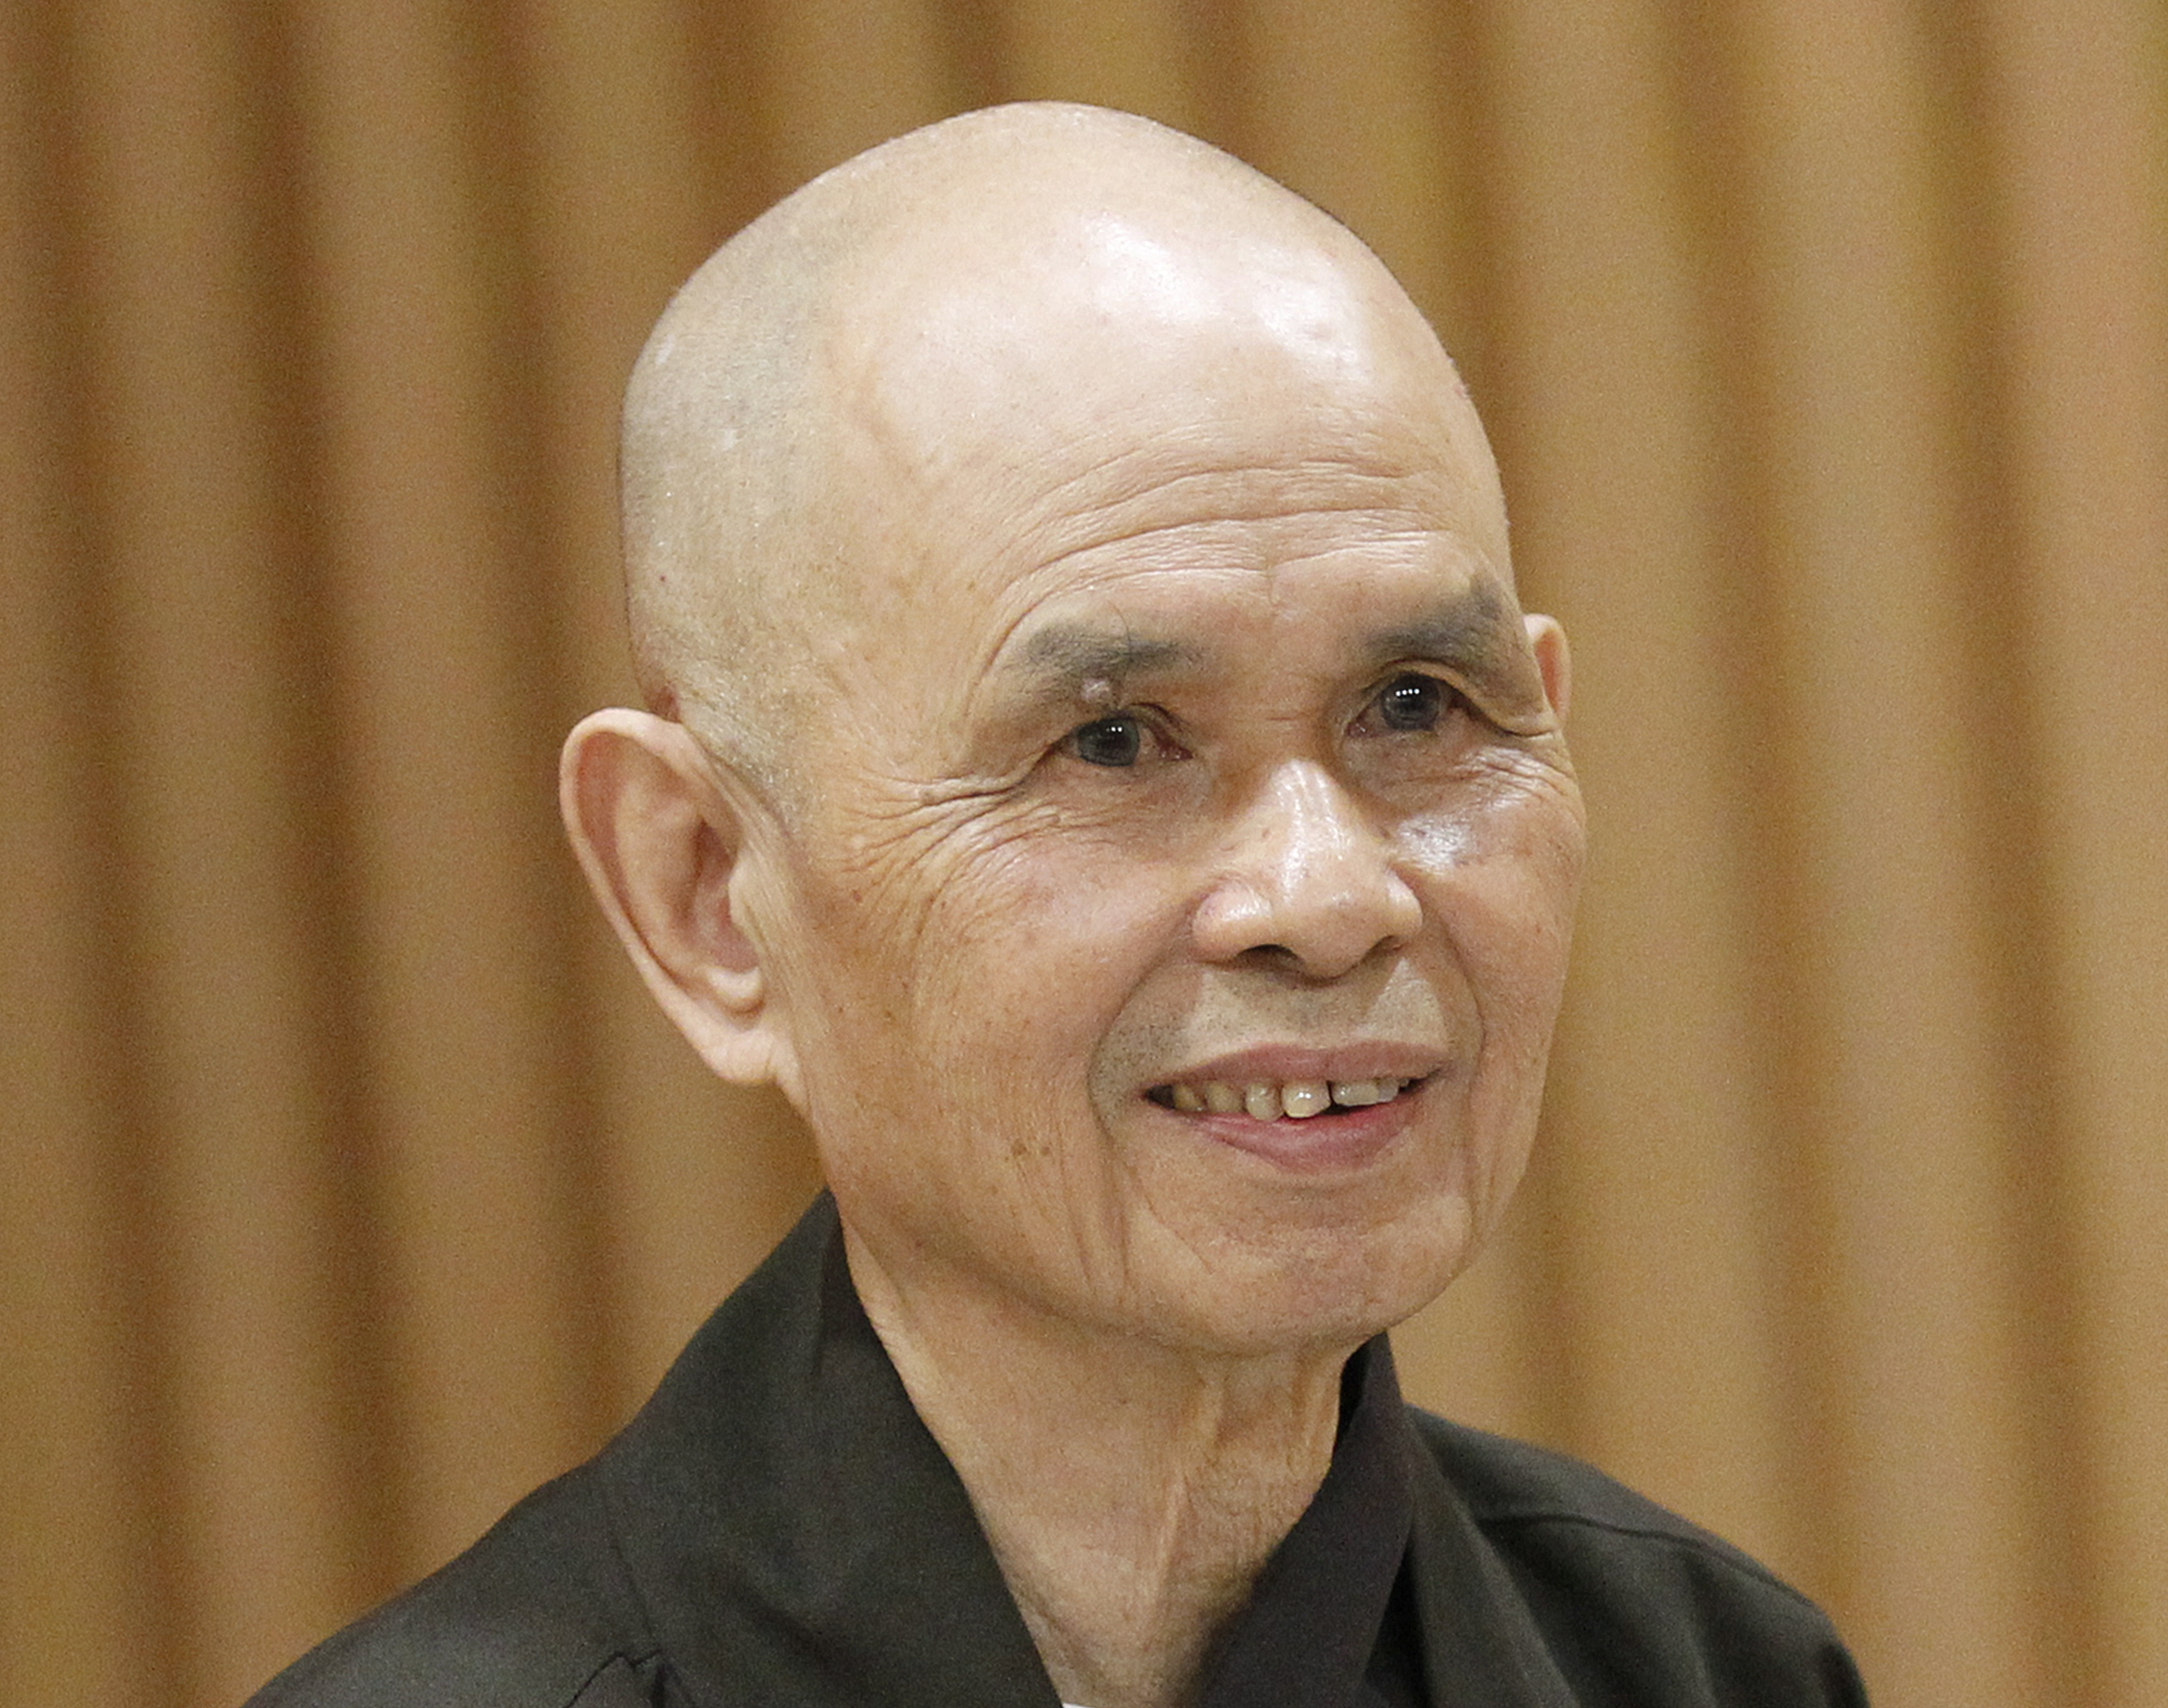 epa09701105 (FILE) -  Vietnamese Zen Buddhist monk Thich Nhat Hanh, who left Vietnam in 1966 and is living in France, arrives for the opening of the exhibition 'Calligraphic Meditation, The Mindful Art of Thich Nhat Hanh' at the Bangkok Art and Culture Center (BACC) in Bangkok, Thailand, 03 April 2013  (reissued 21 January 2022). According to The Washington Post, Thich Nhat Hanh has died at age 95 in Vietnam on 21 January 2022.  EPA/STR *** Local Caption *** 50776635